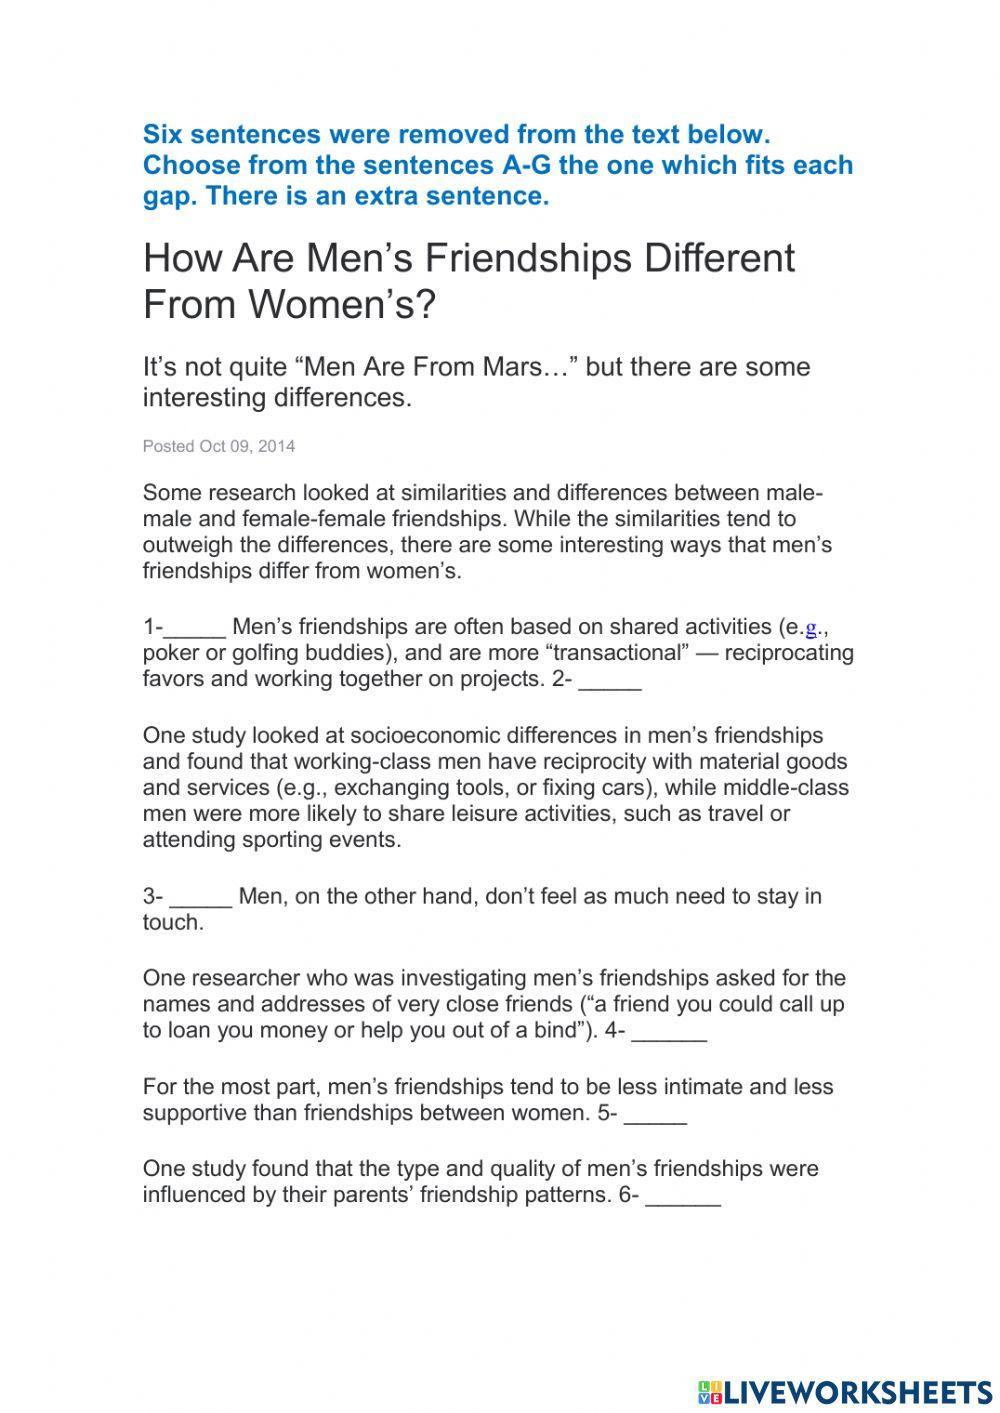 How Are Men’s Friendships Different From Women’s?